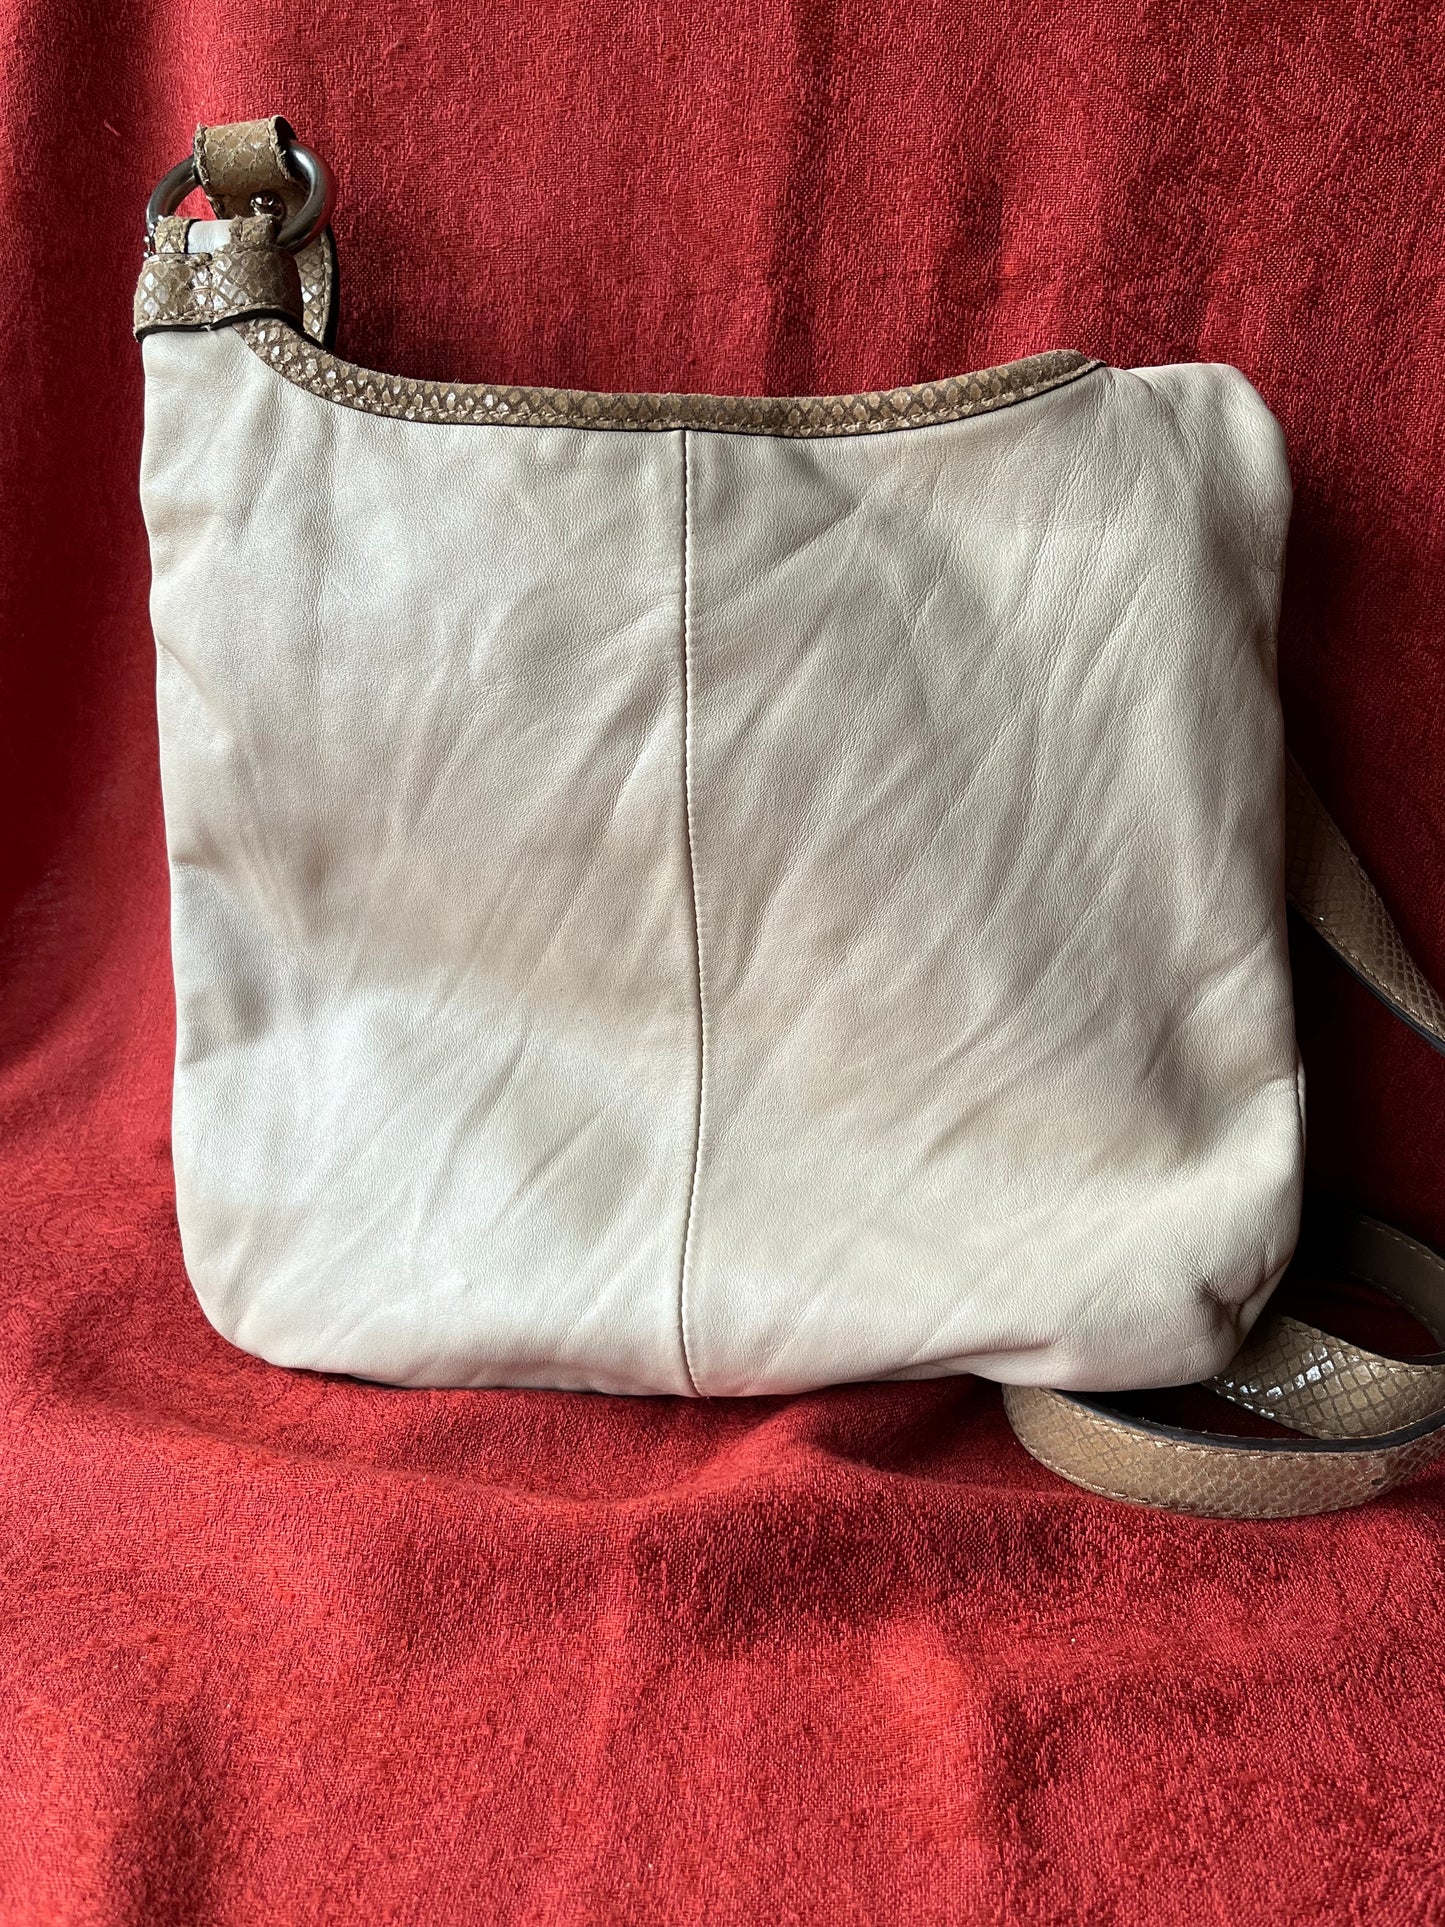 Coach "Penelope" Cream Leather with Tan Snakeskin Trim and Strap Crossbody Bag